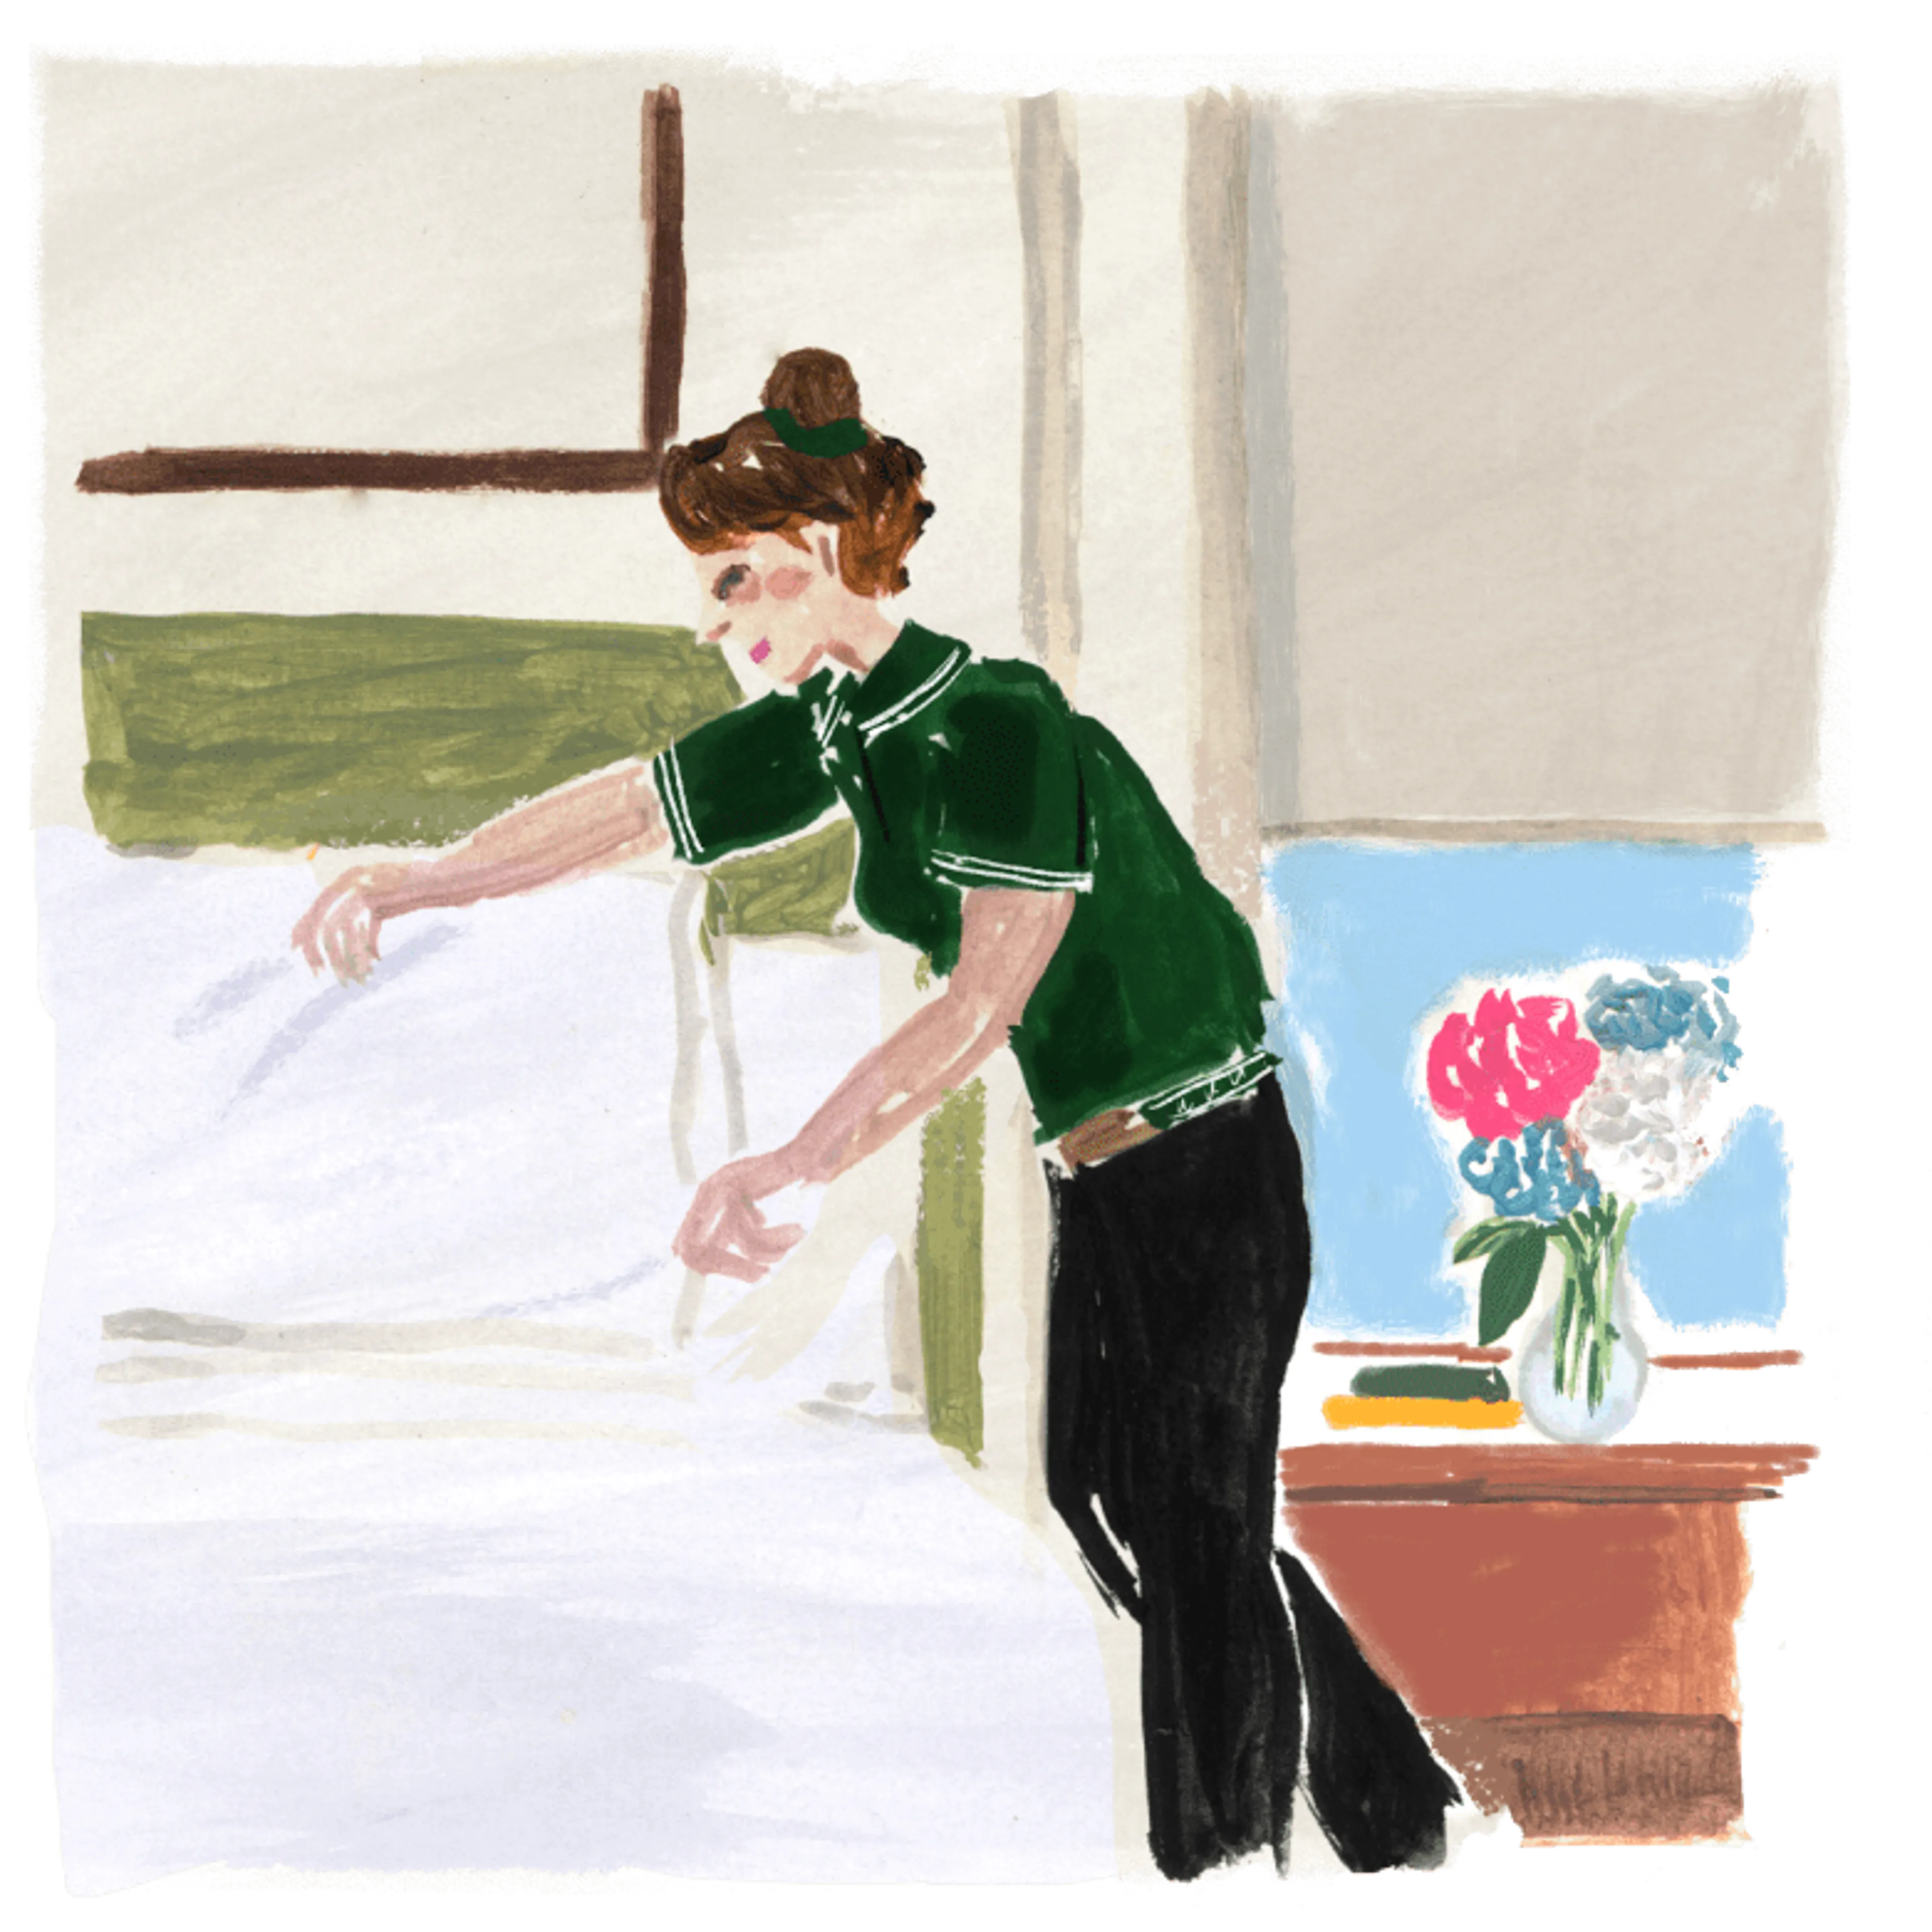 Housekeeping services keeping your room fresh and clean